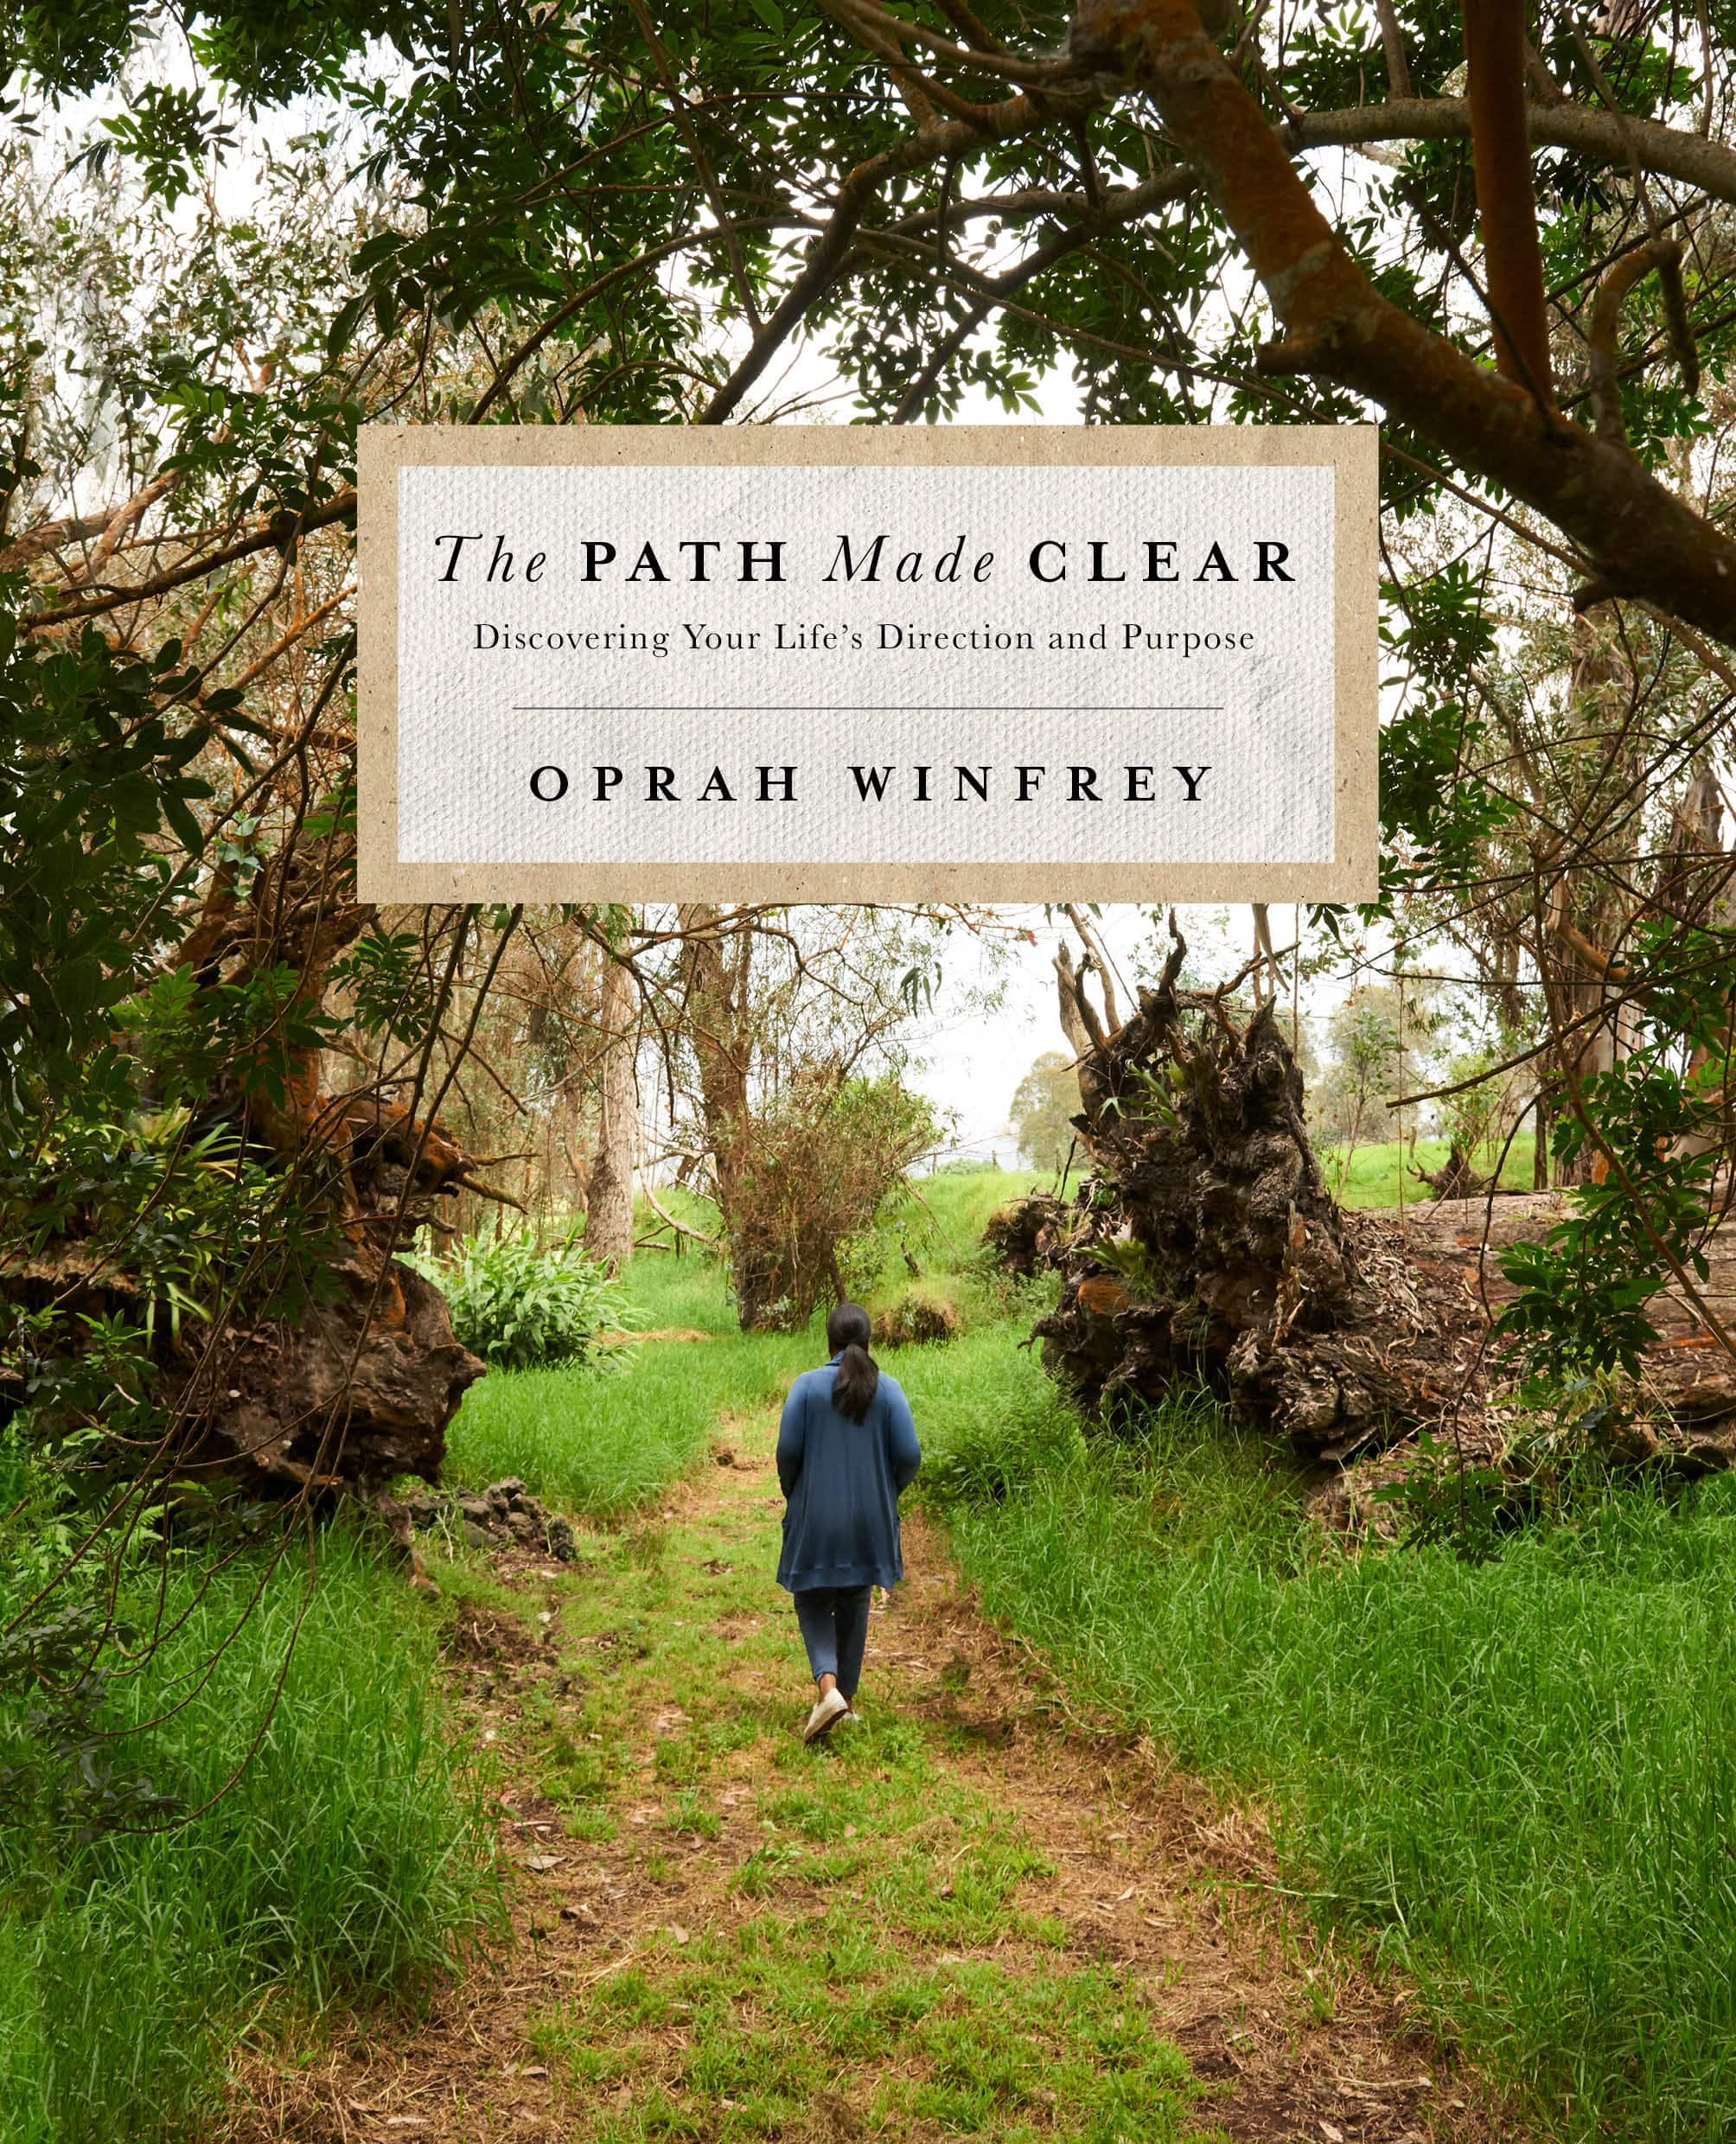 Best Godmother Gifts 2022: The Path Made Clear by Oprah 2022